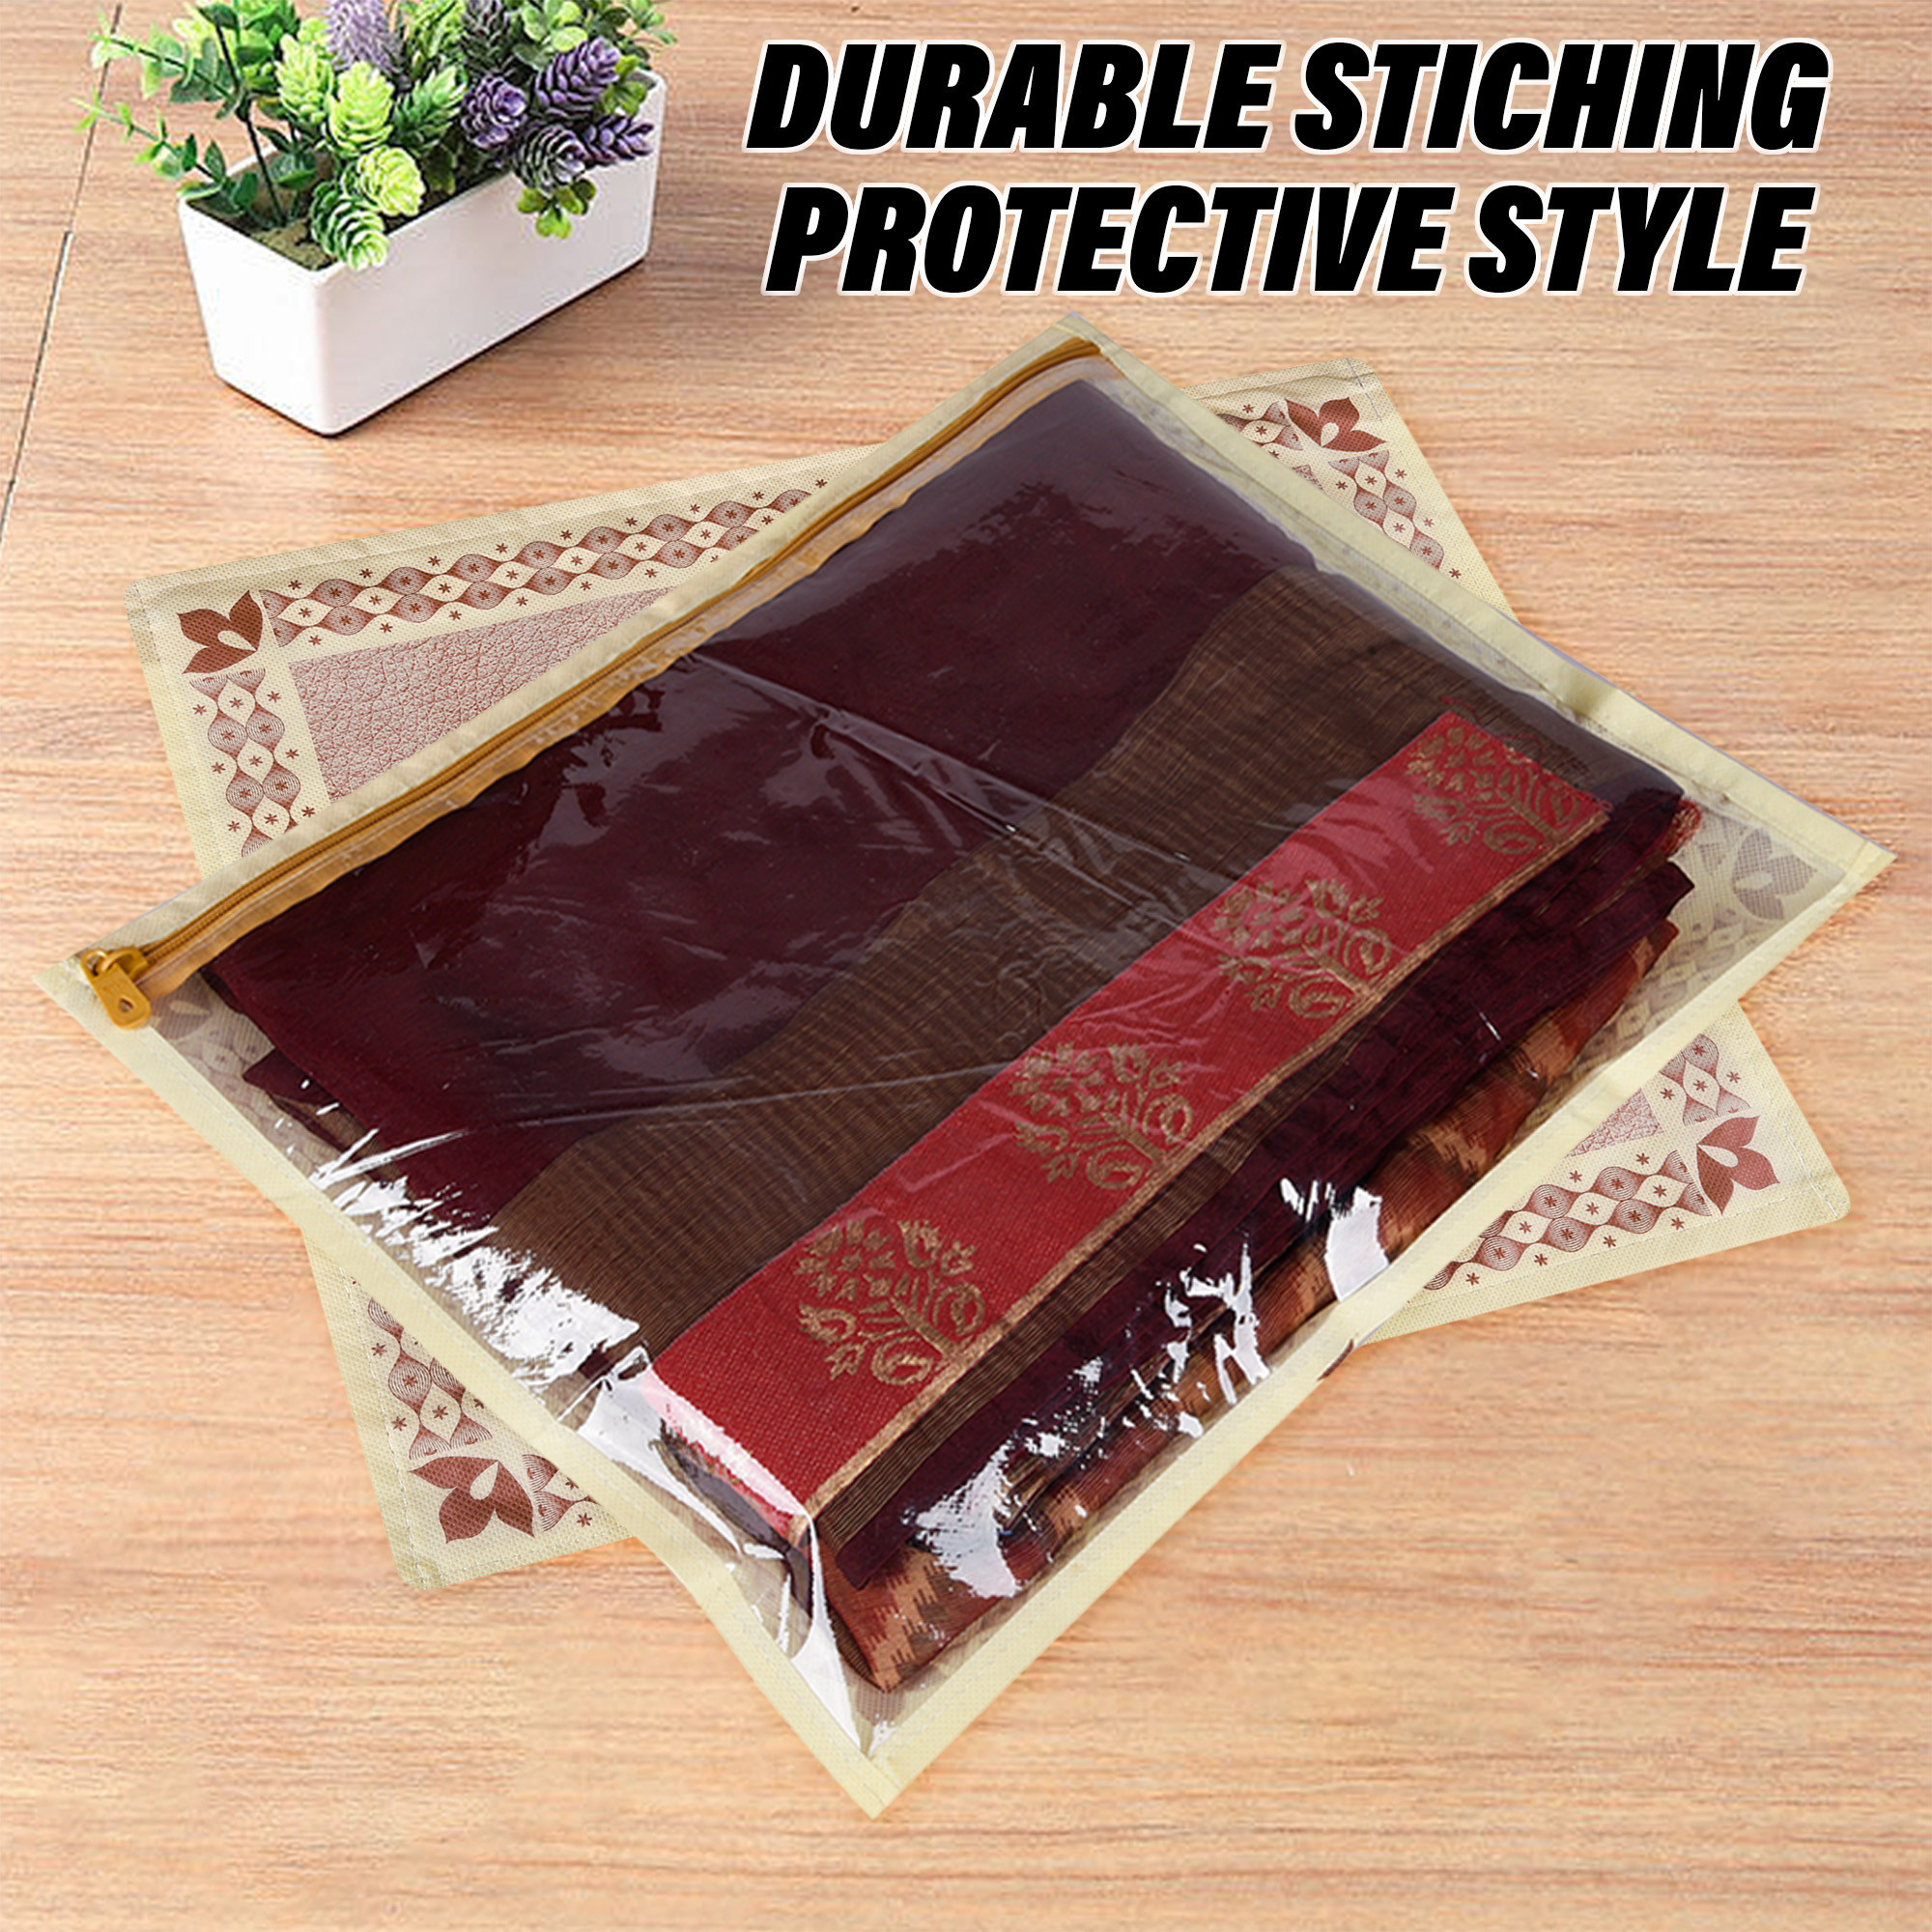 Kuber Industries Saree Cover | Clothes Storage Bag | Single Packing Saree Cover with Zip Closure | Wardrobe Organizer | Palki Packing Saree Cover |Brown